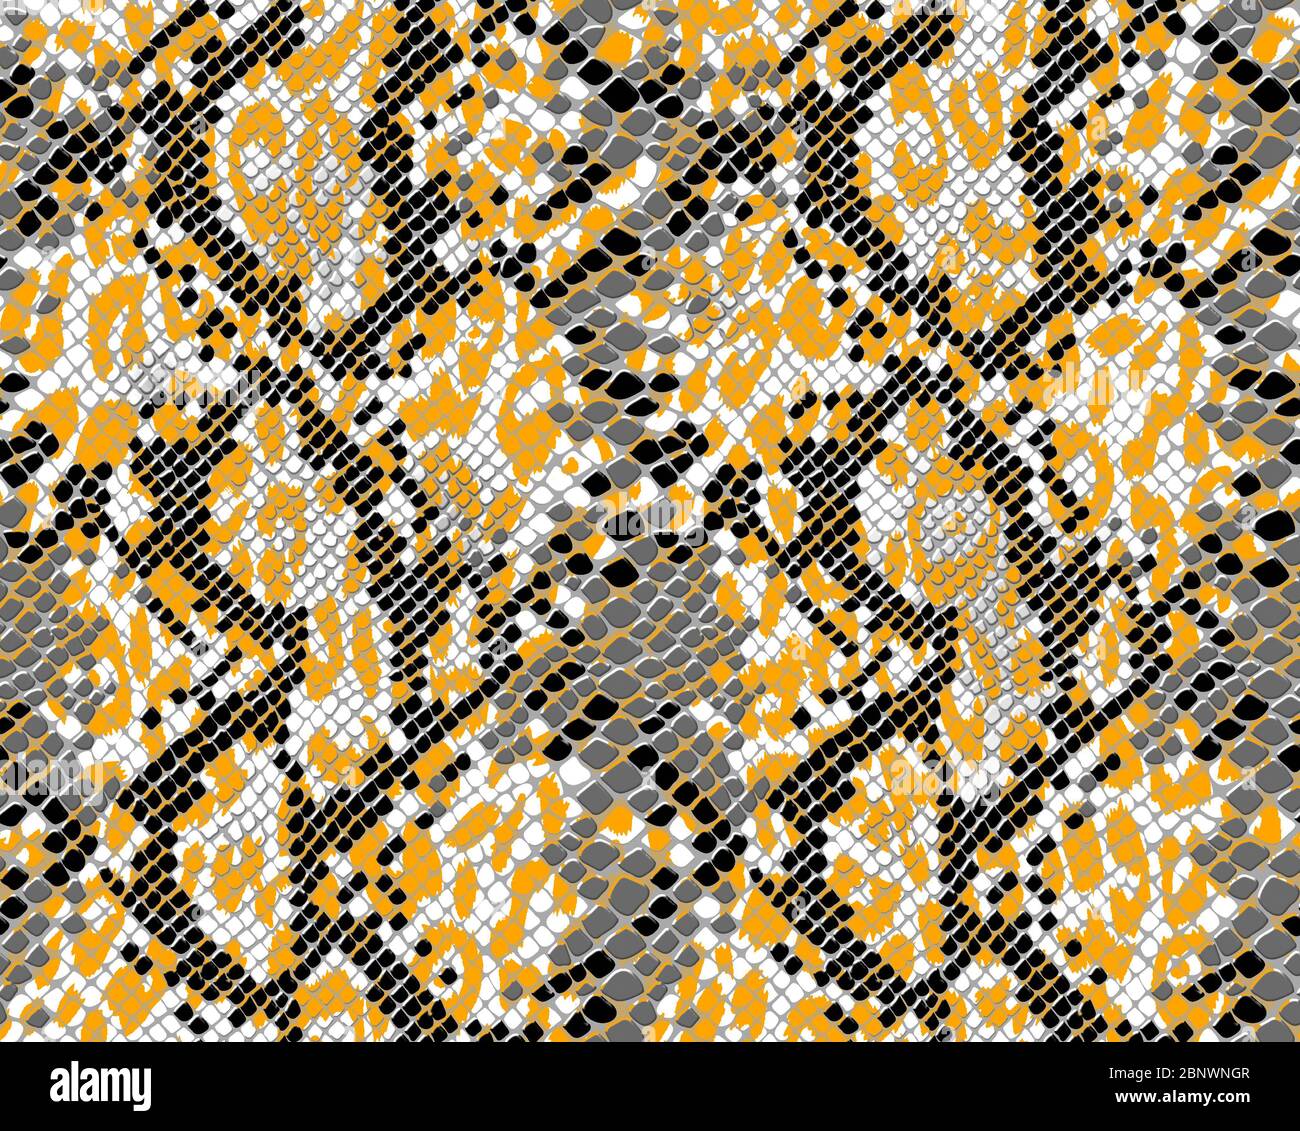 Snake skin pattern texture with brown and grey colors. Seamless Texture snake. Fashionable print. Ready for textile prints. Stock Photo